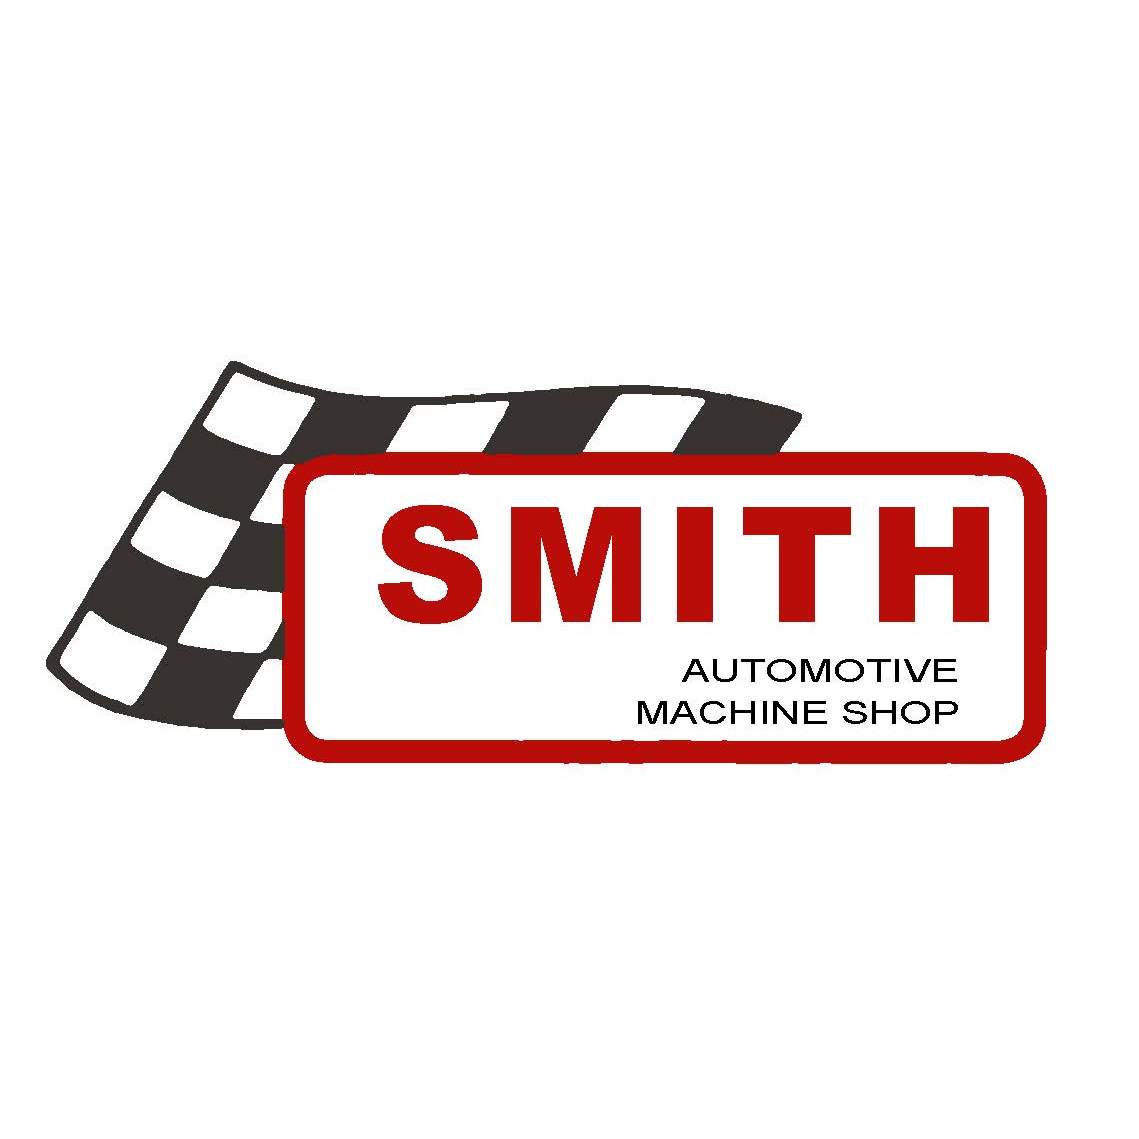 Smith Automotive Machine Shop Coupons near me in Frankfort ...